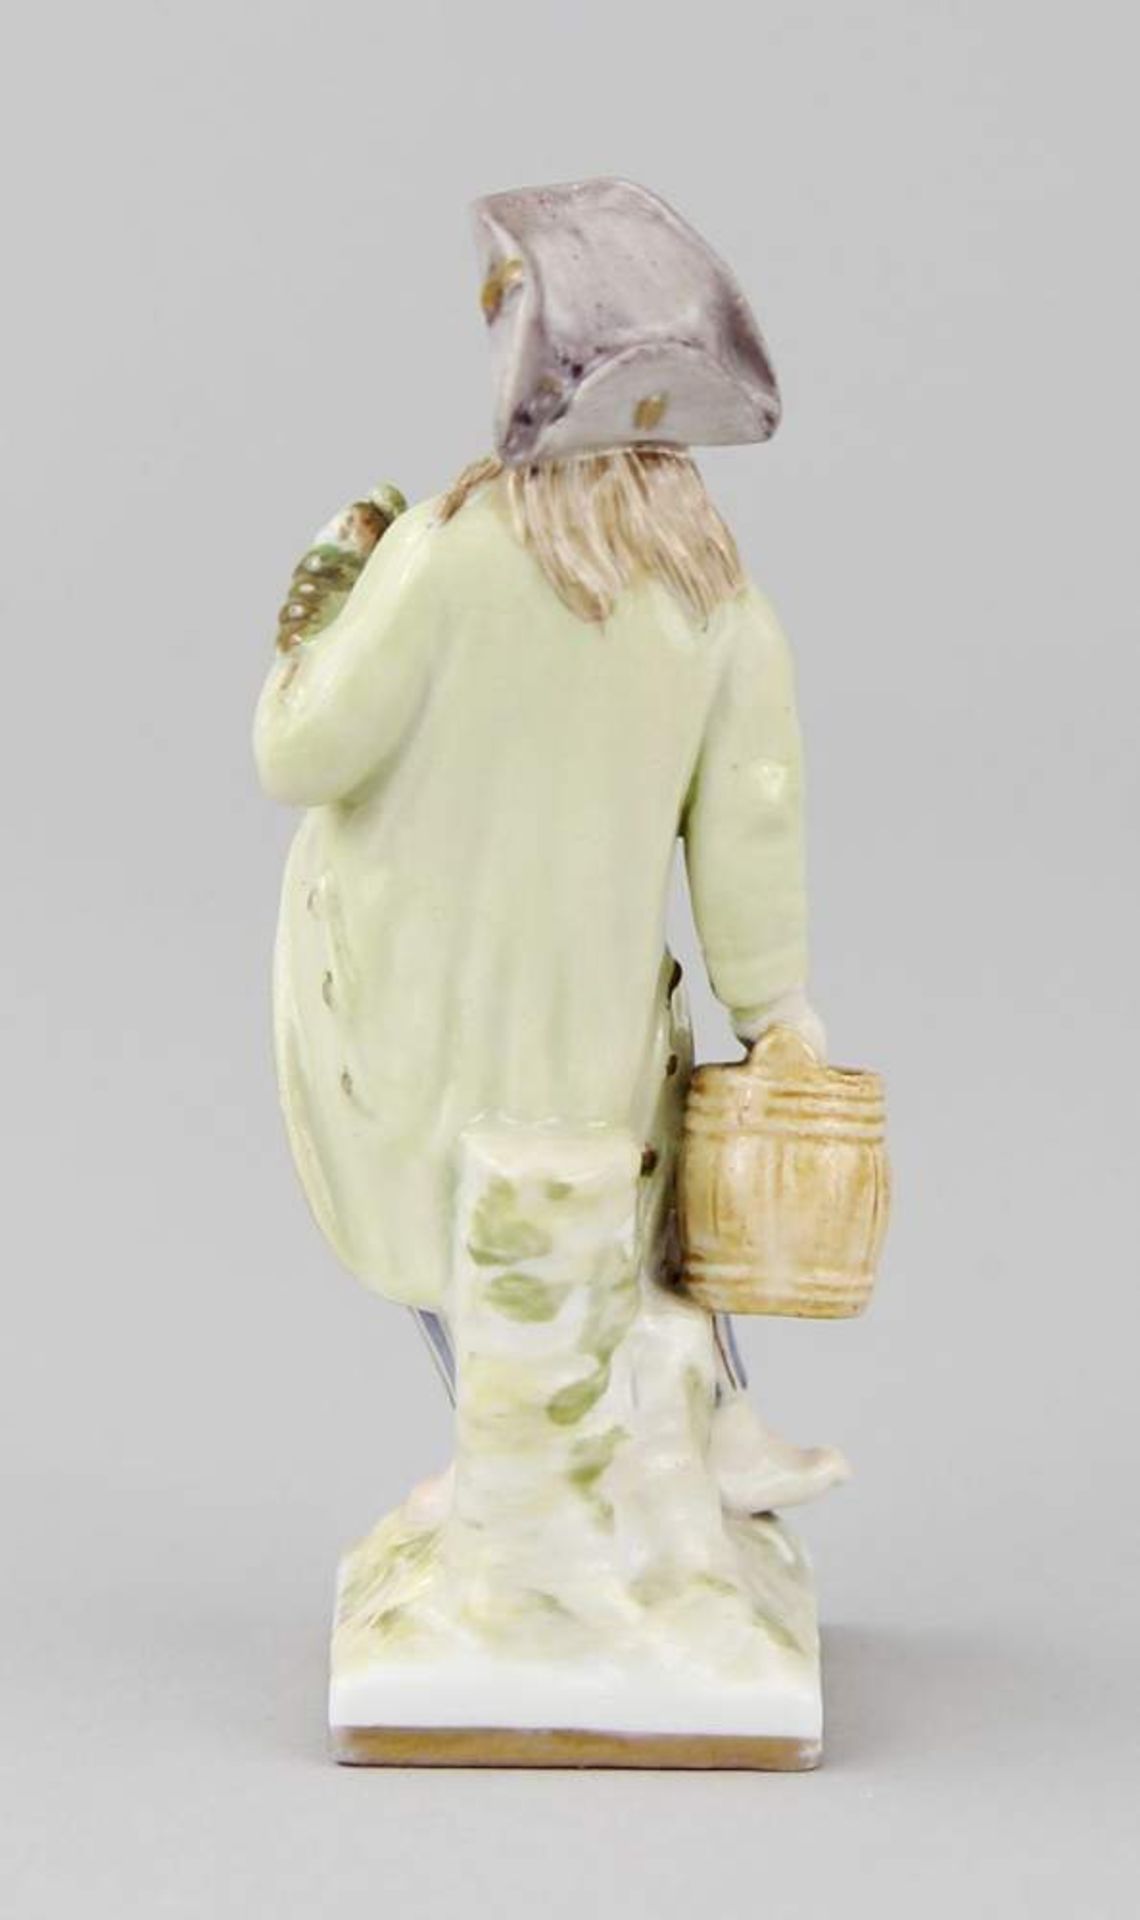 Early Berlin figure "Dill pickle seller" Painted and gilded porcelain, blue underglaze mark, model - Image 3 of 4